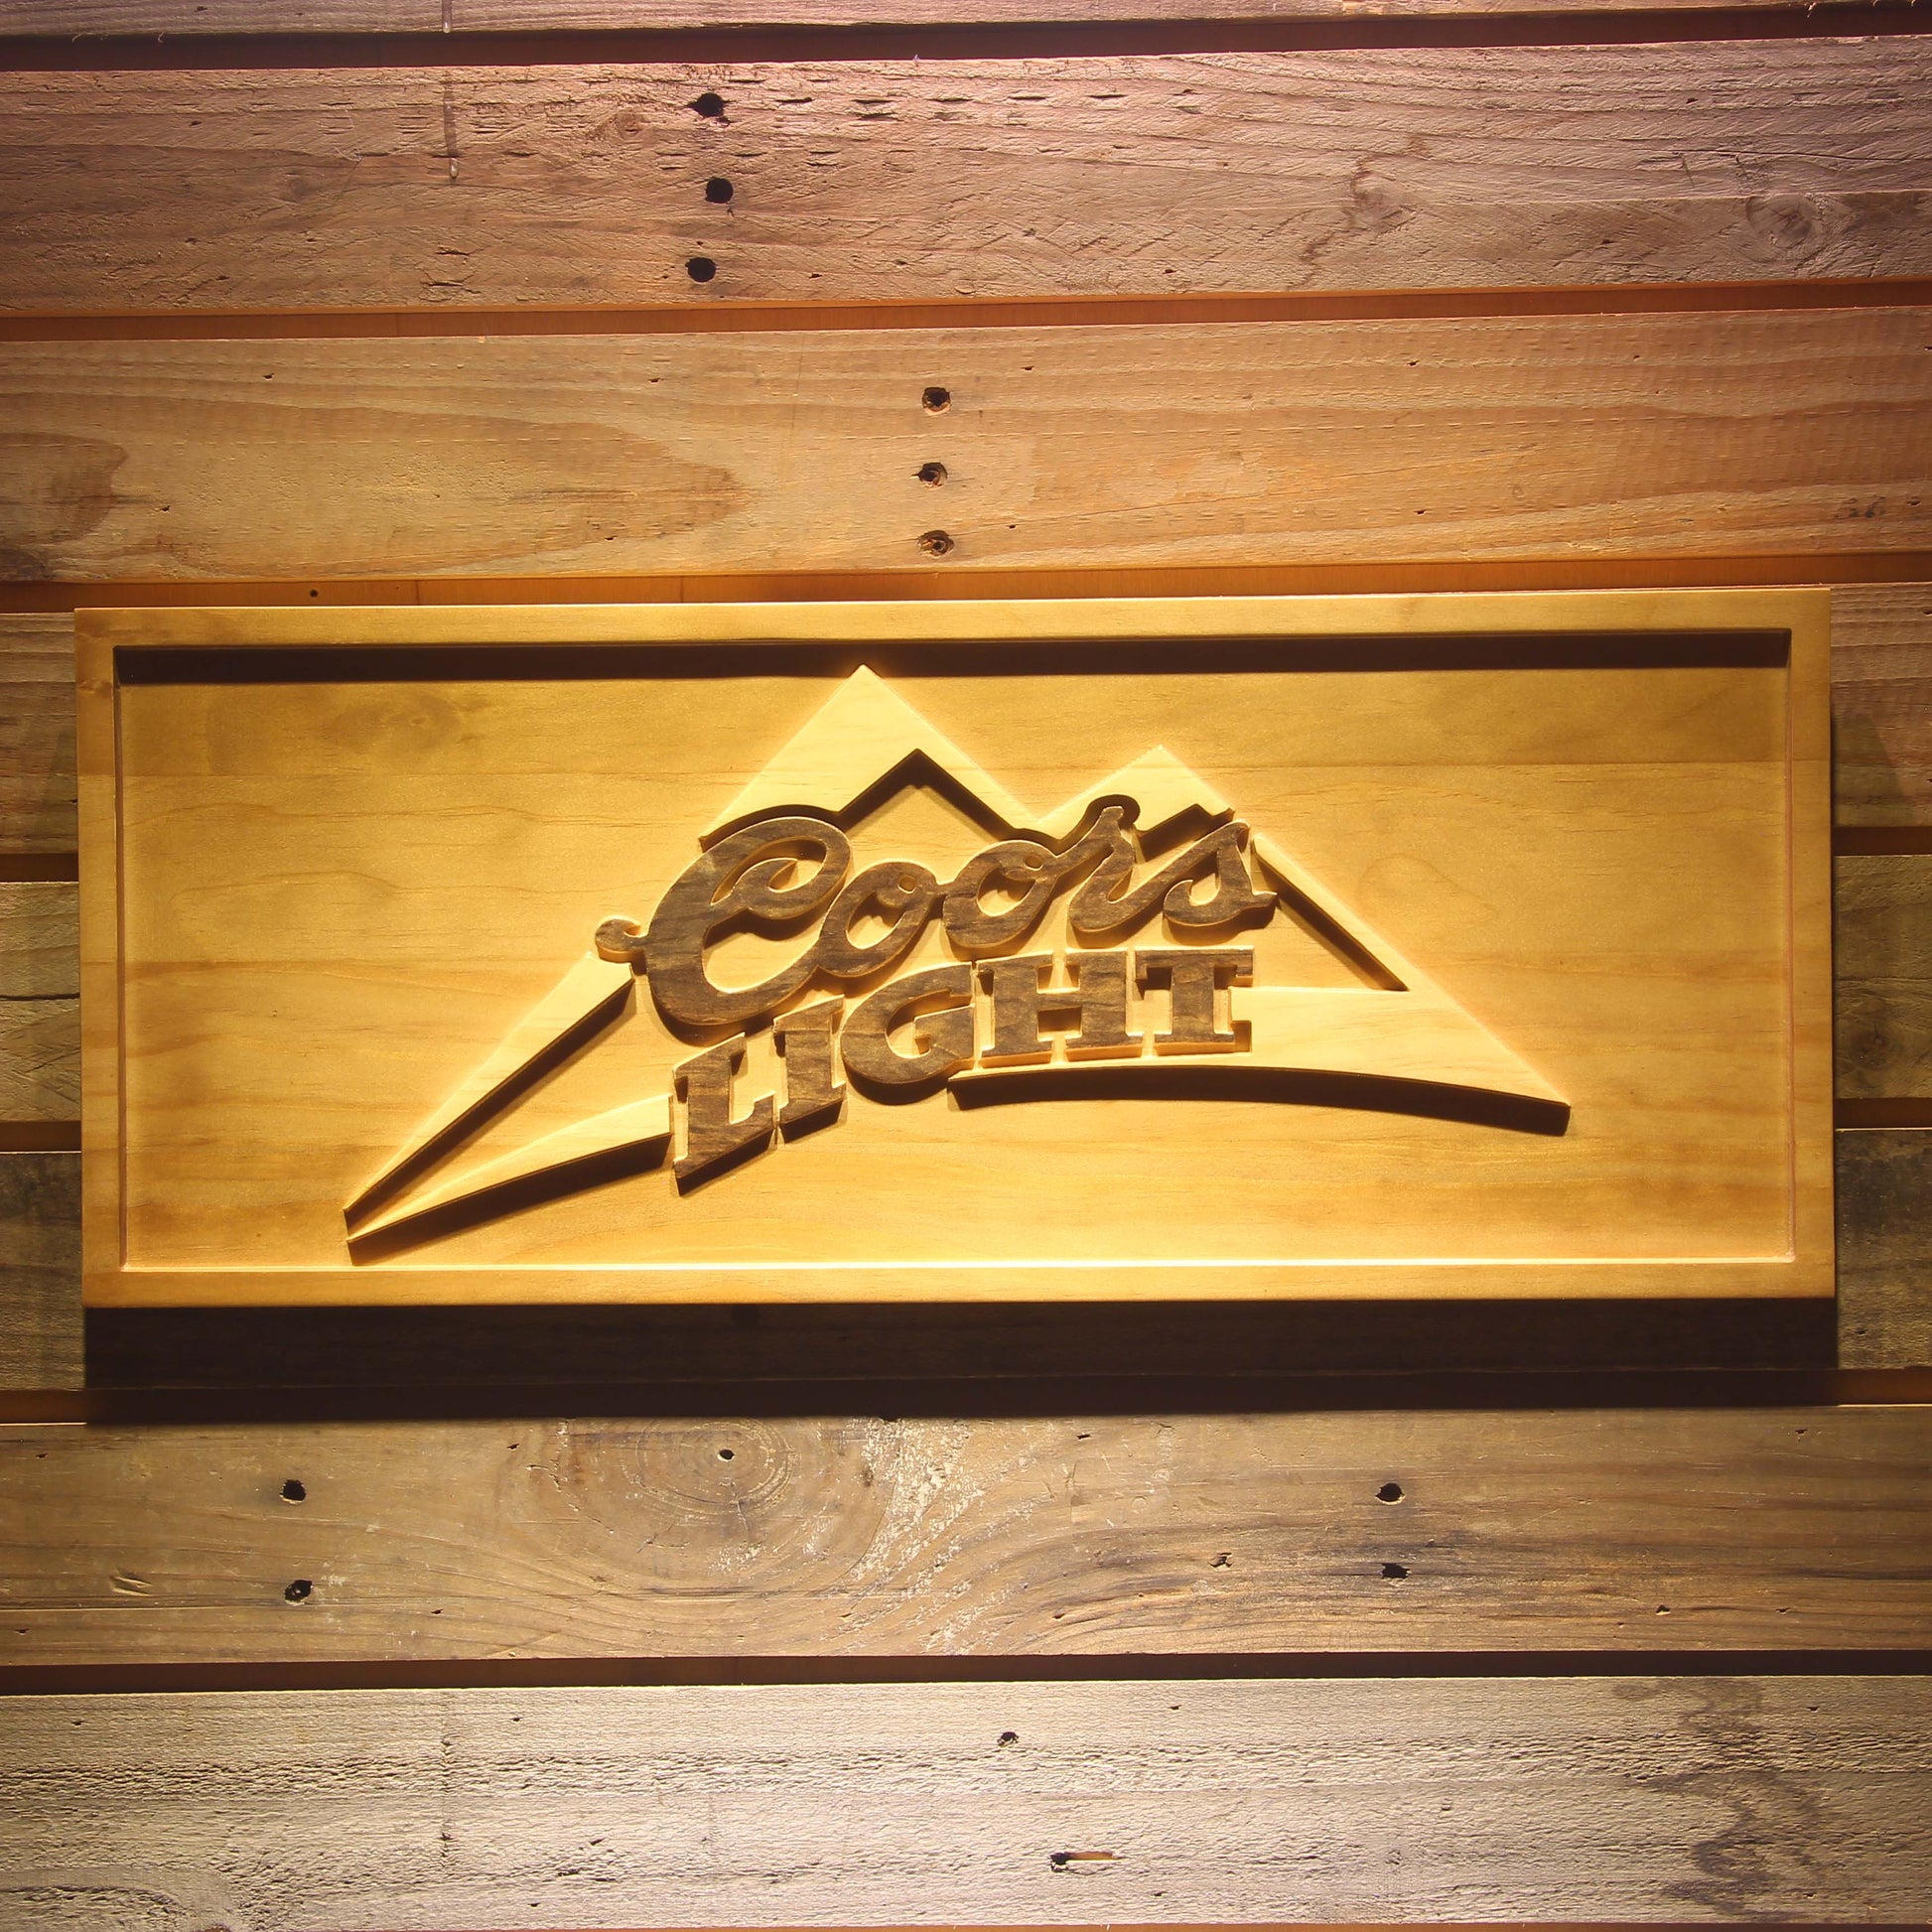 Coors Light  3D Wooden Signs by Woody Signs Co. - Handmade Crafted Unique Wooden Creative